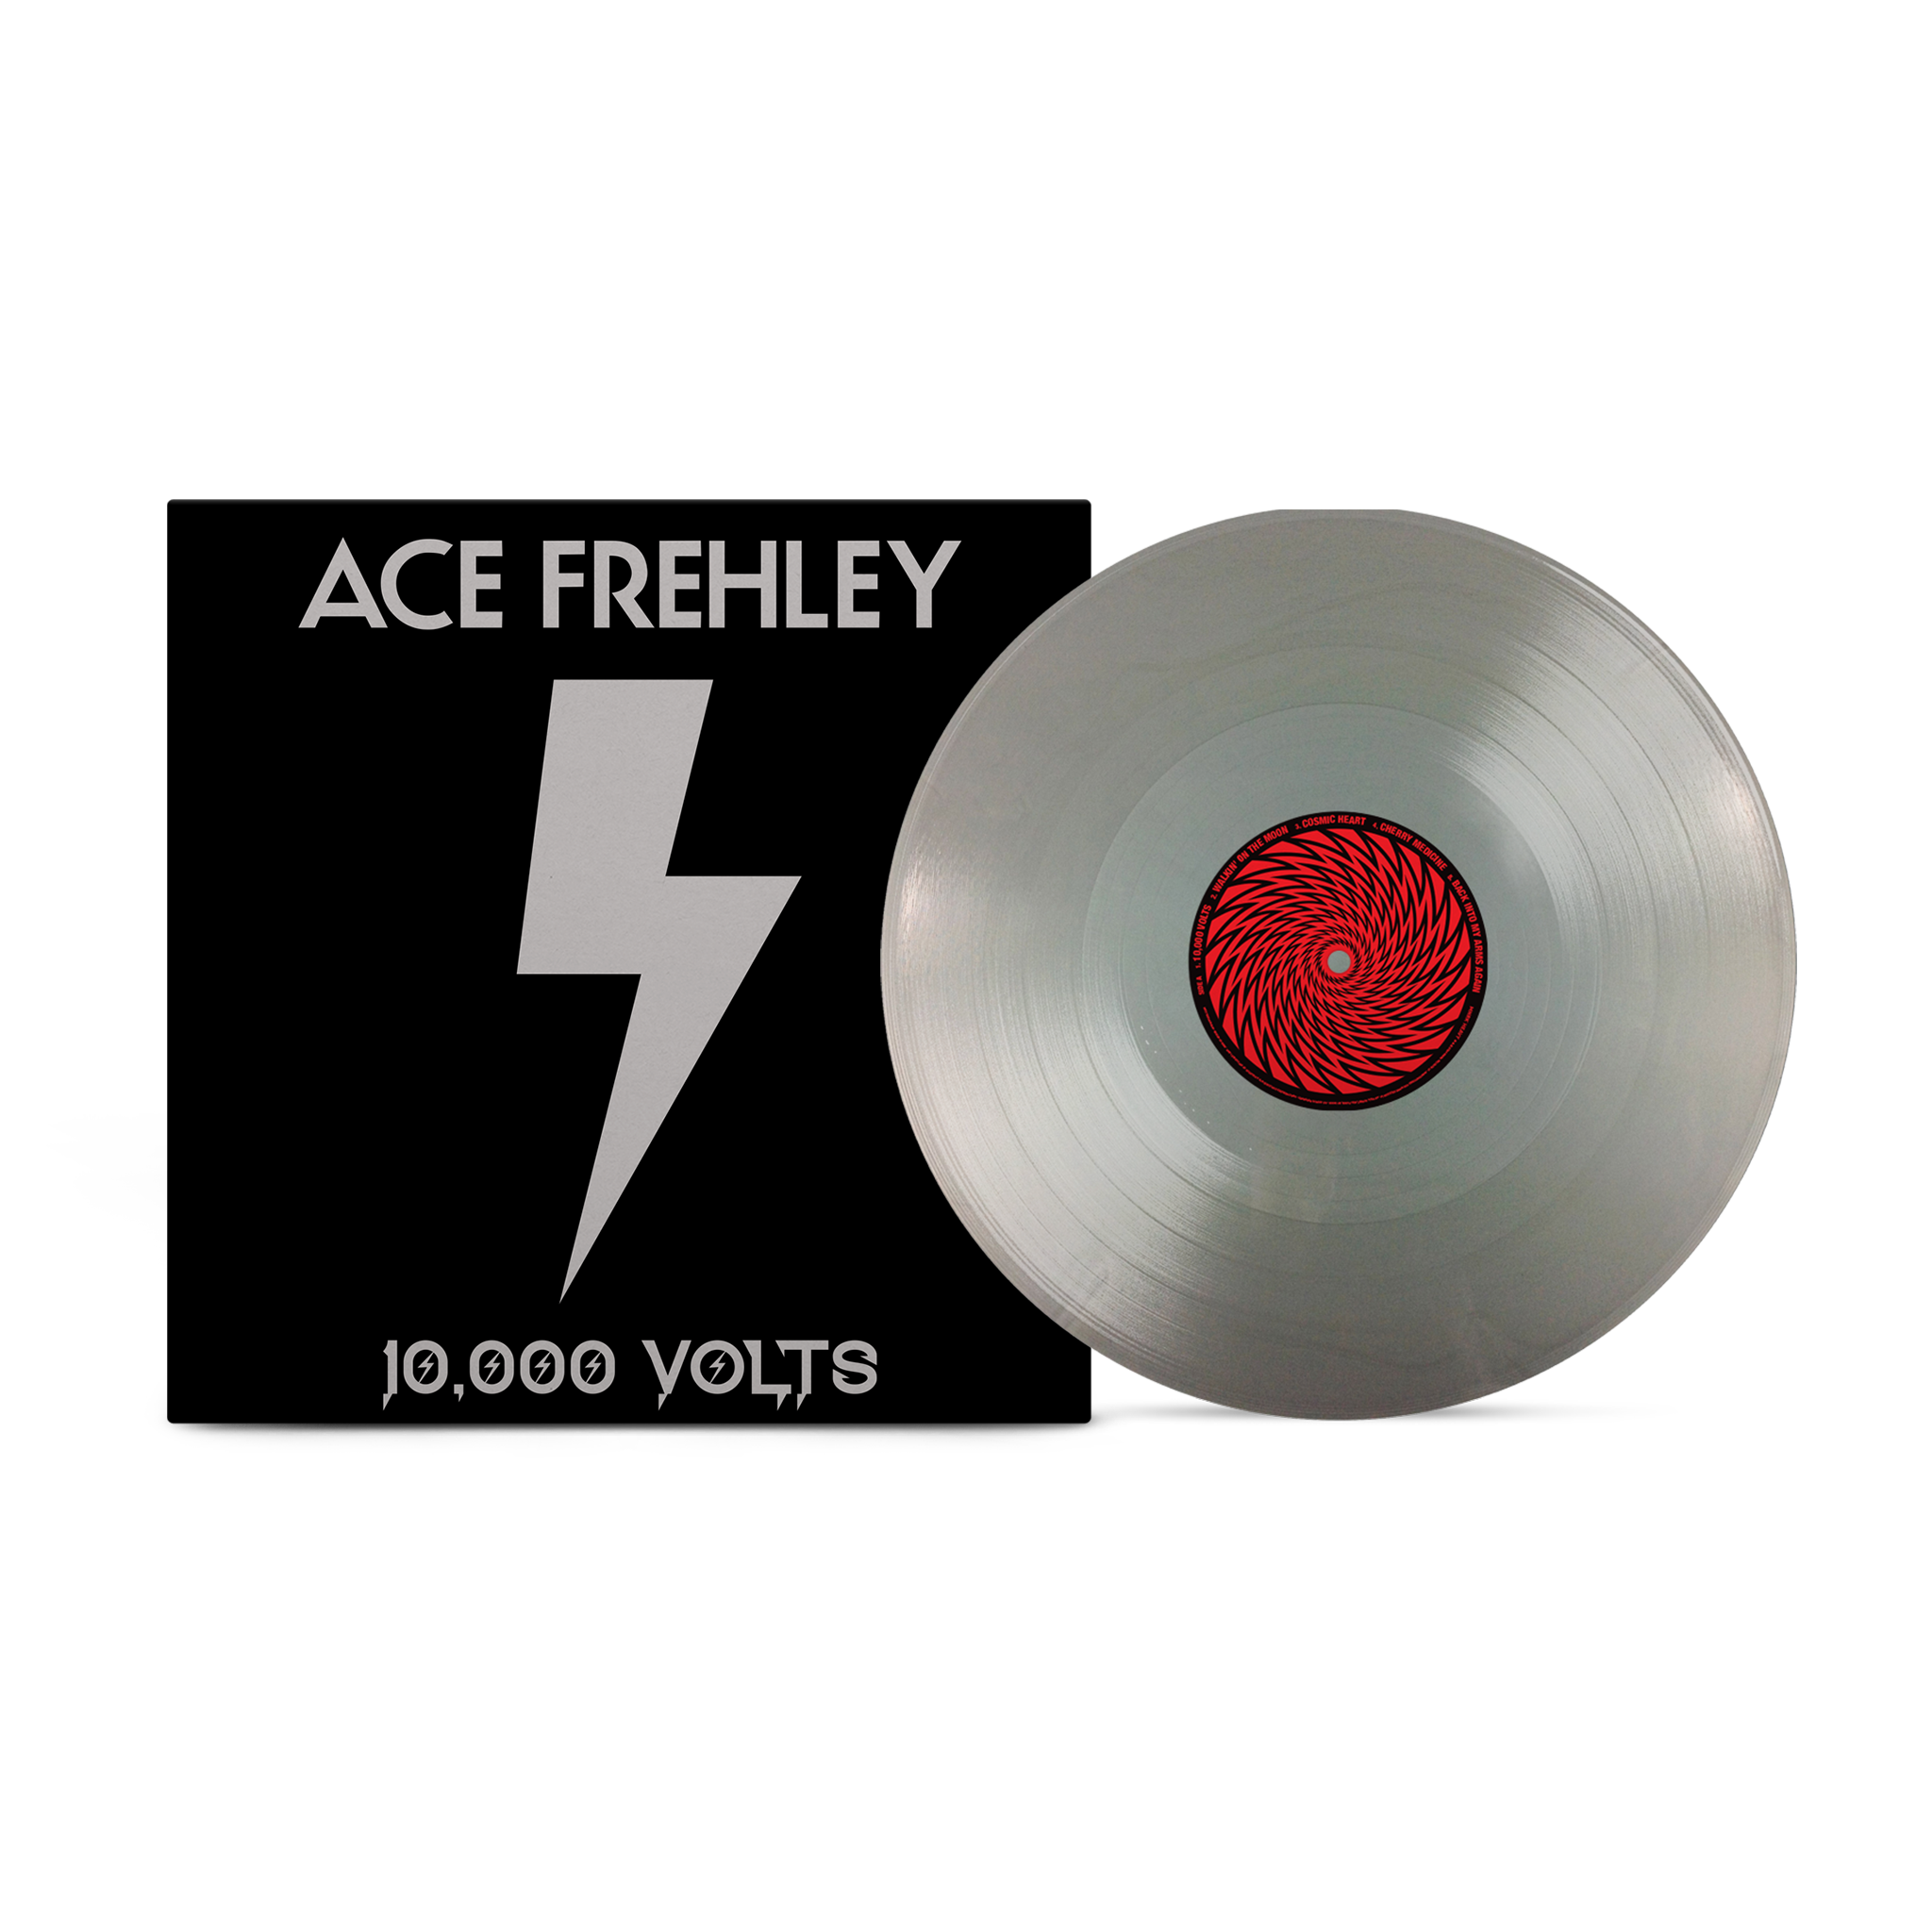 10,000 Volts available in Silver Metallic. Get the limited edition vinyl by Ace Frehley